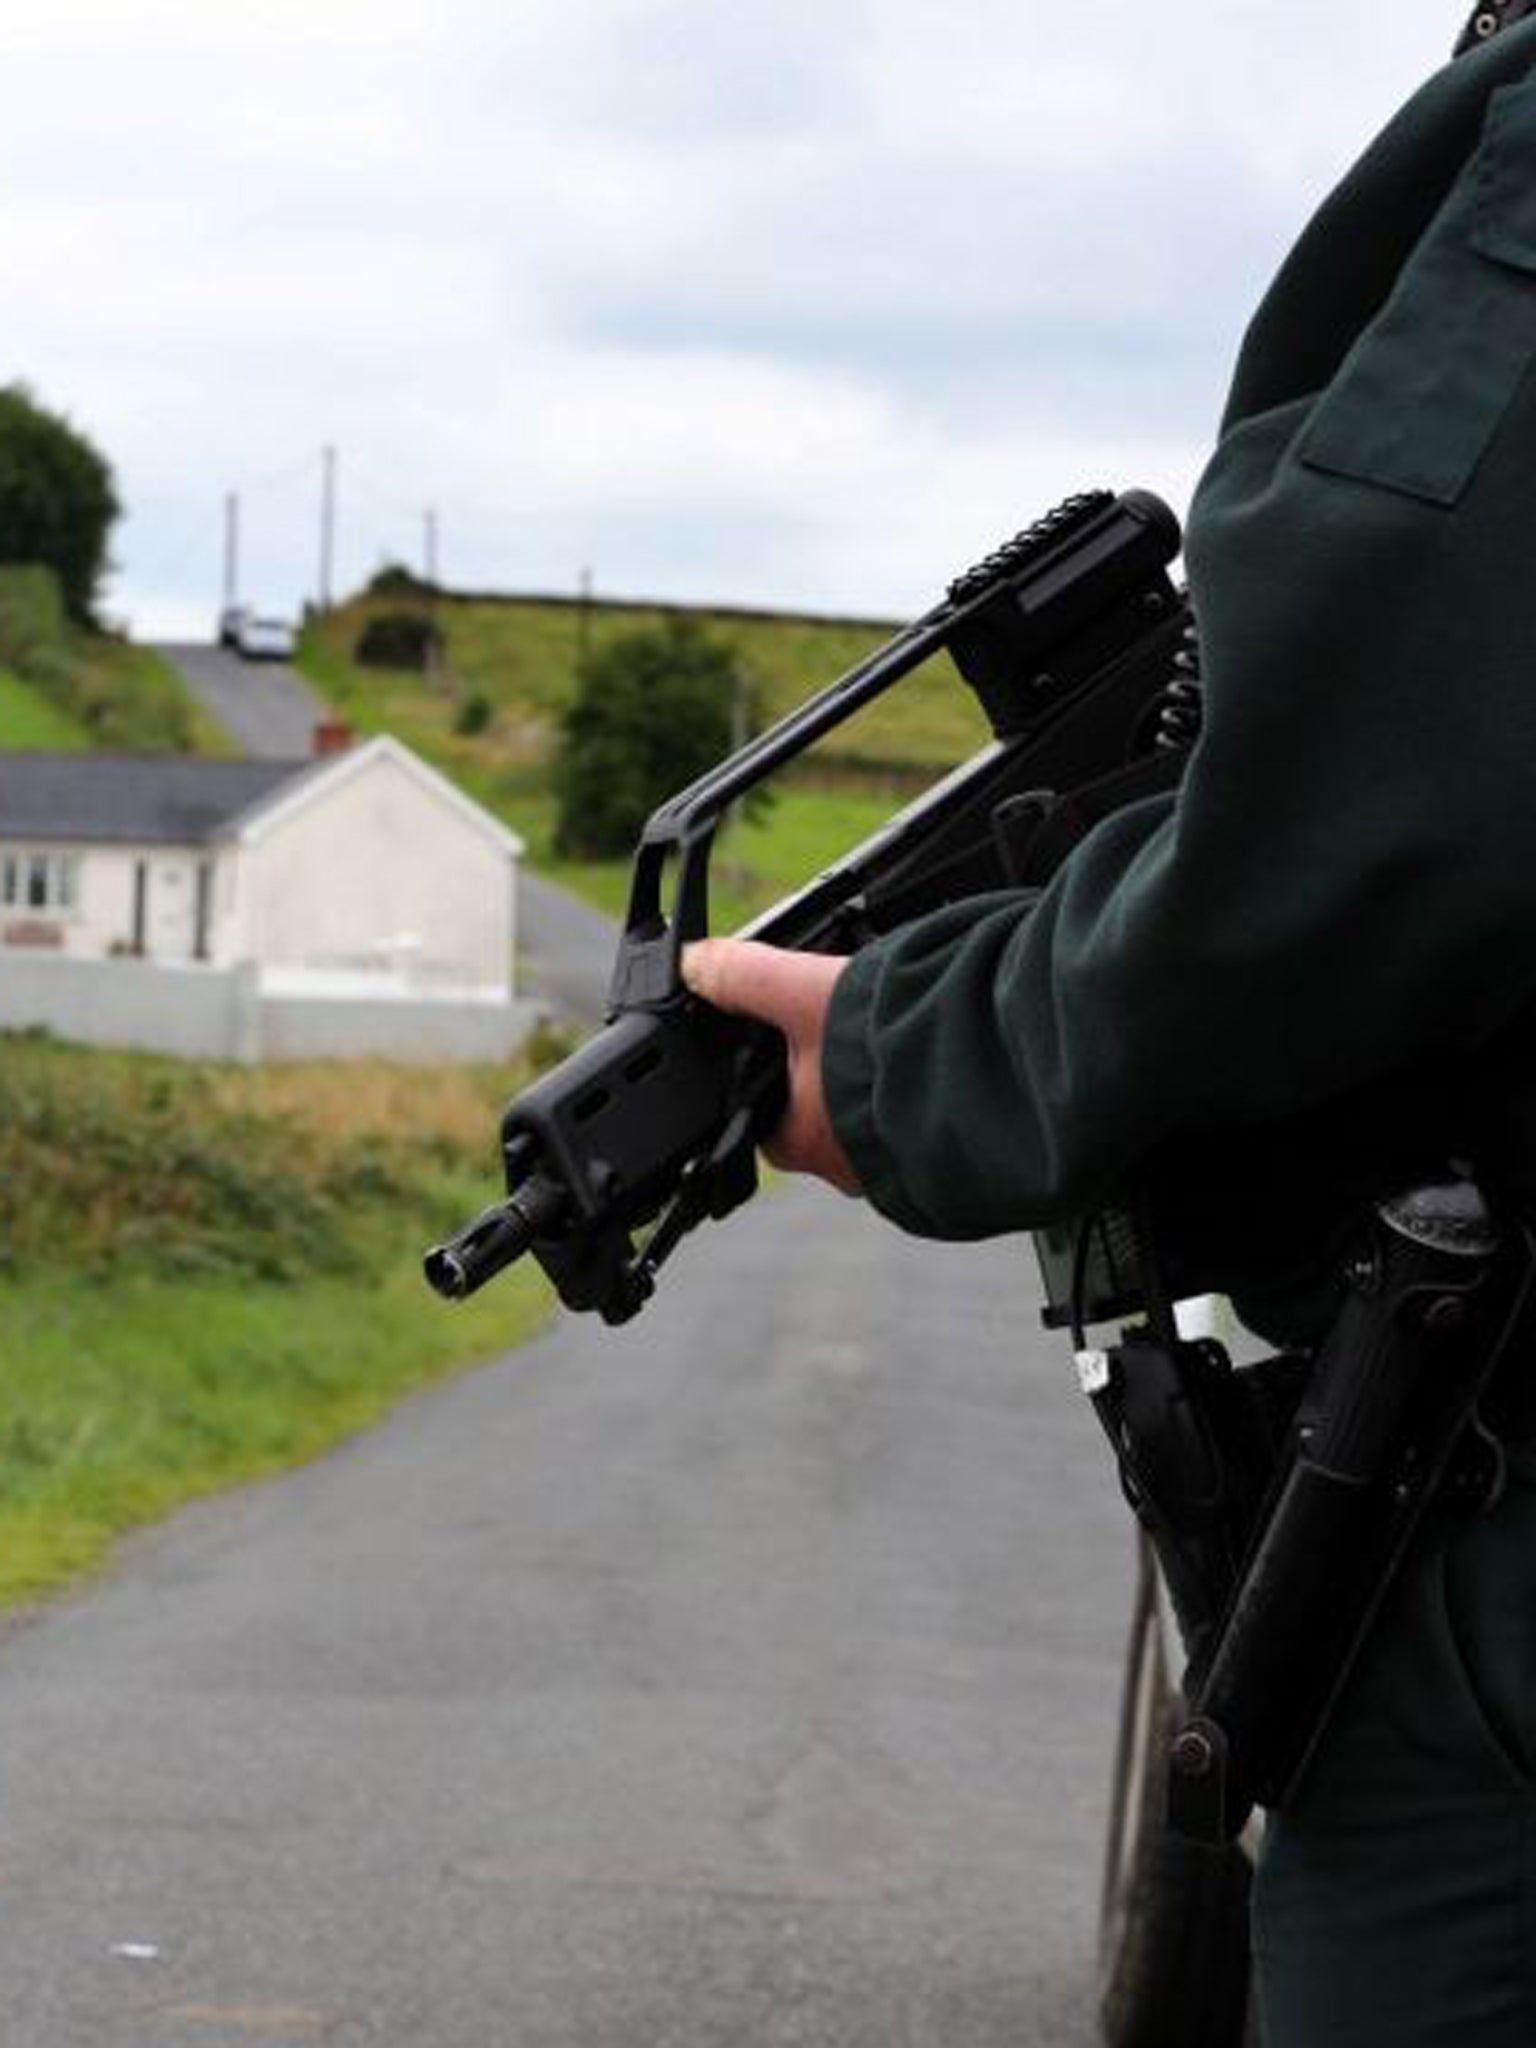 Police at the scene near the village of Cullyhanna, Northern Ireland, where a dissident republican-style rocket launcher has been discovered